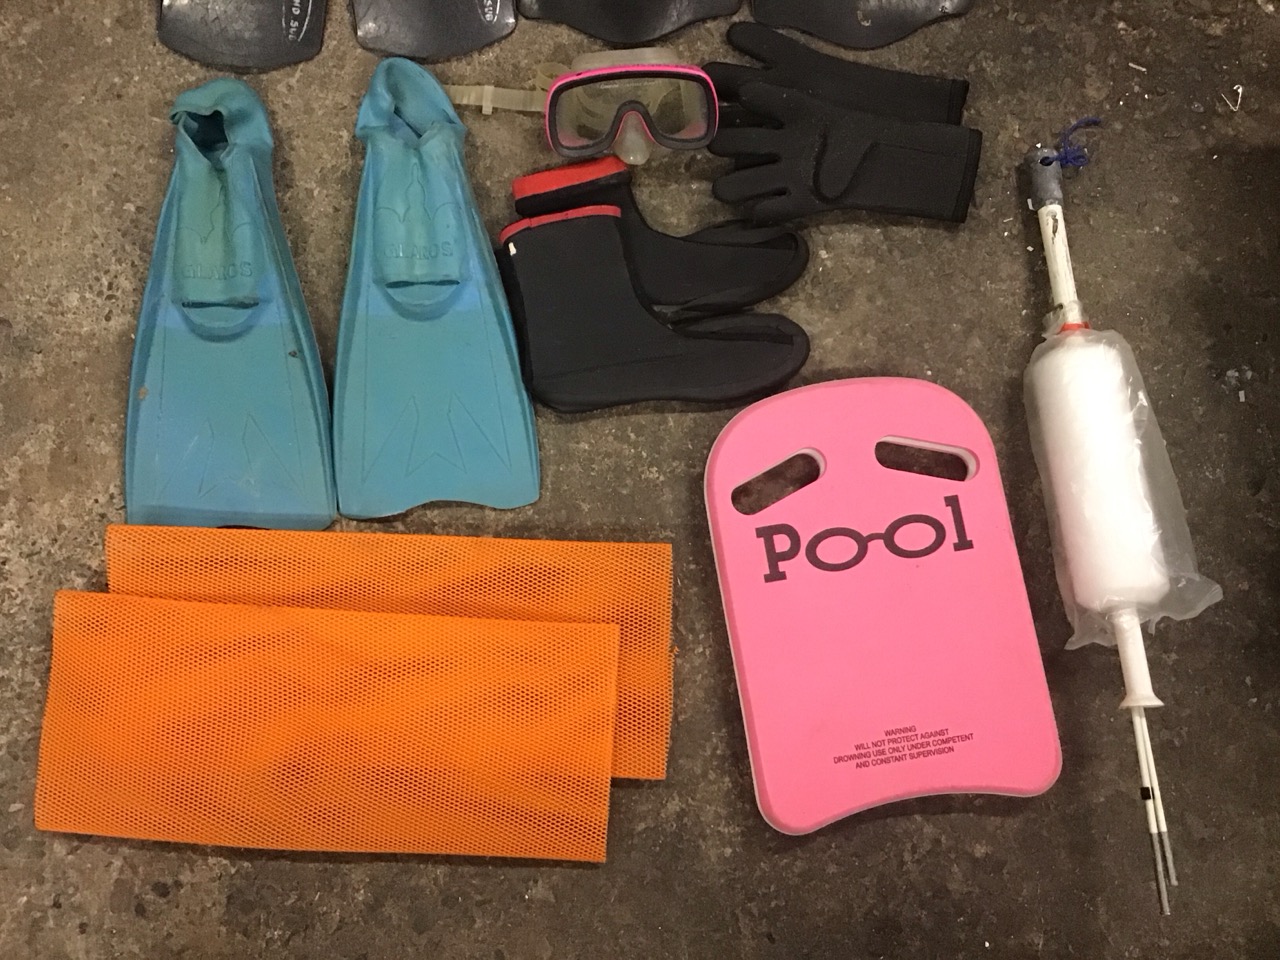 Miscellaneous diving equipment including a Namron scuba tank harness, a floater board, a pair of - Image 3 of 3